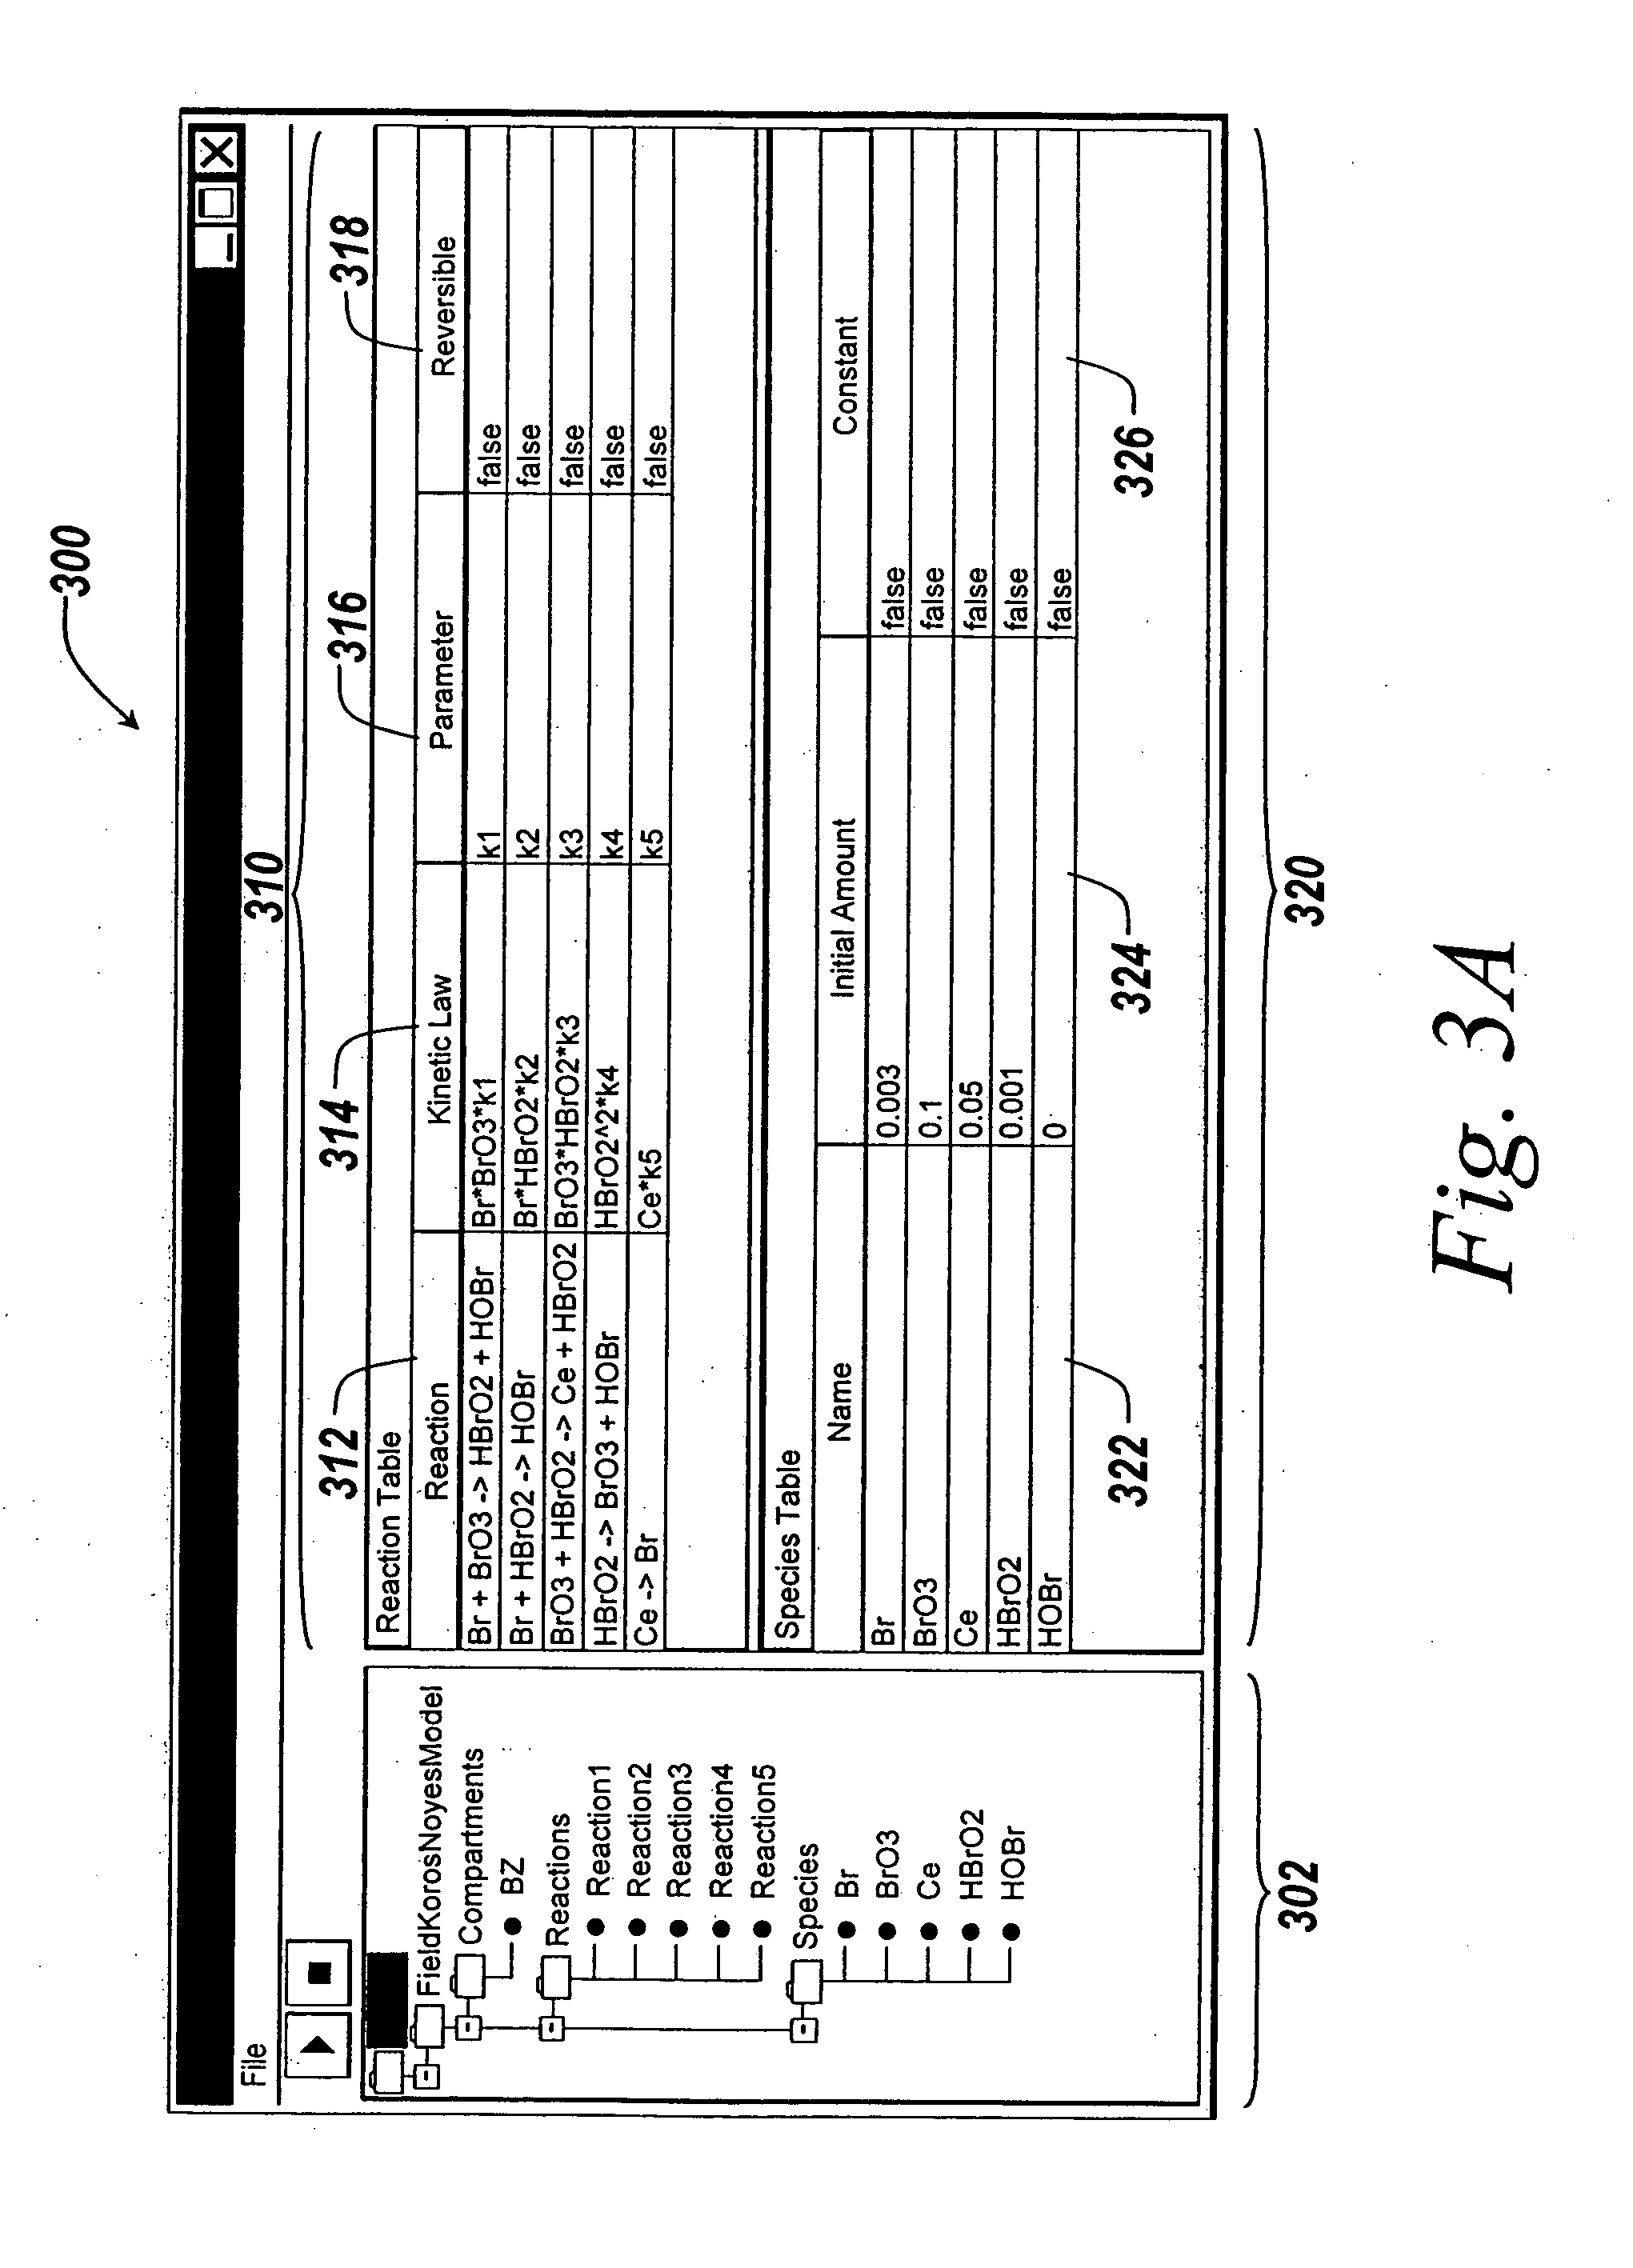 Method and apparatus for improved modeling of chemical and biochemical reactions